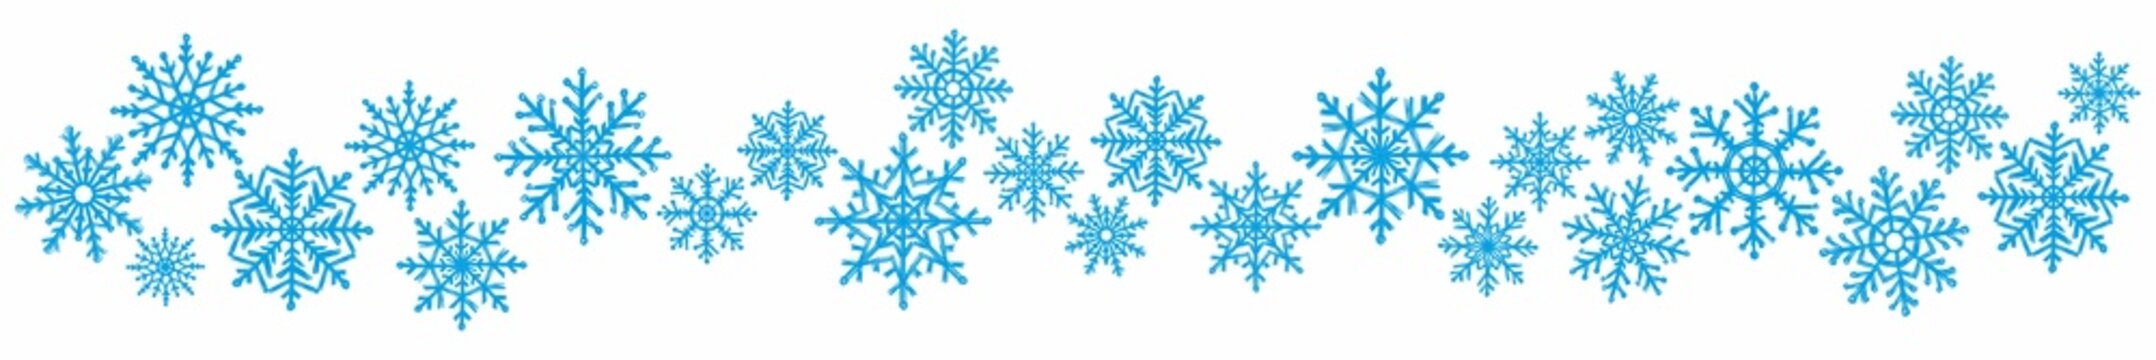 Horizontal pattern with snowflakes, hand-drawn